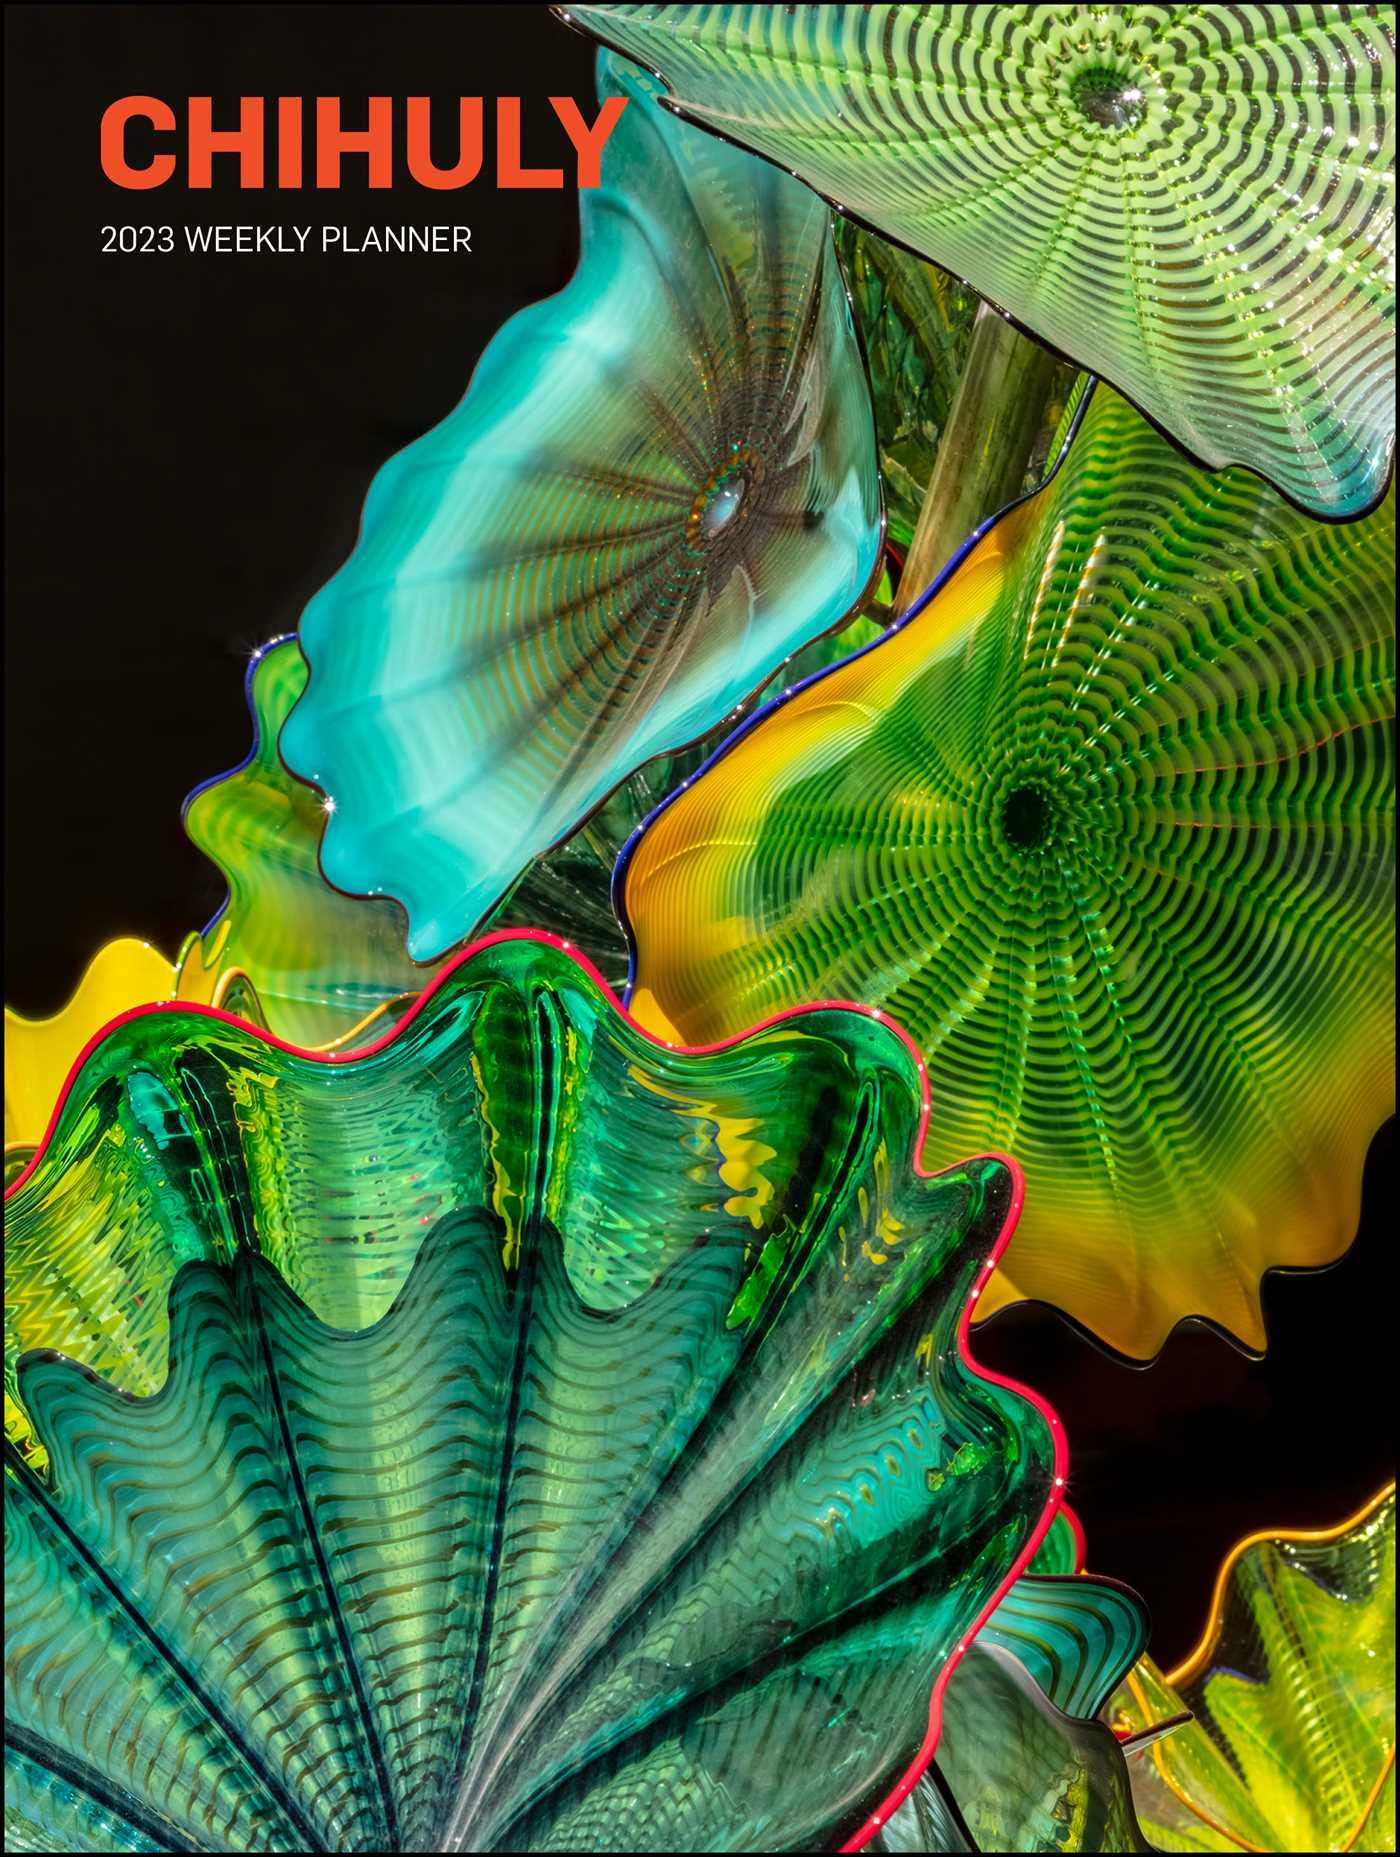 Abrams Chihuly 2023 Weekly Planner Calendar